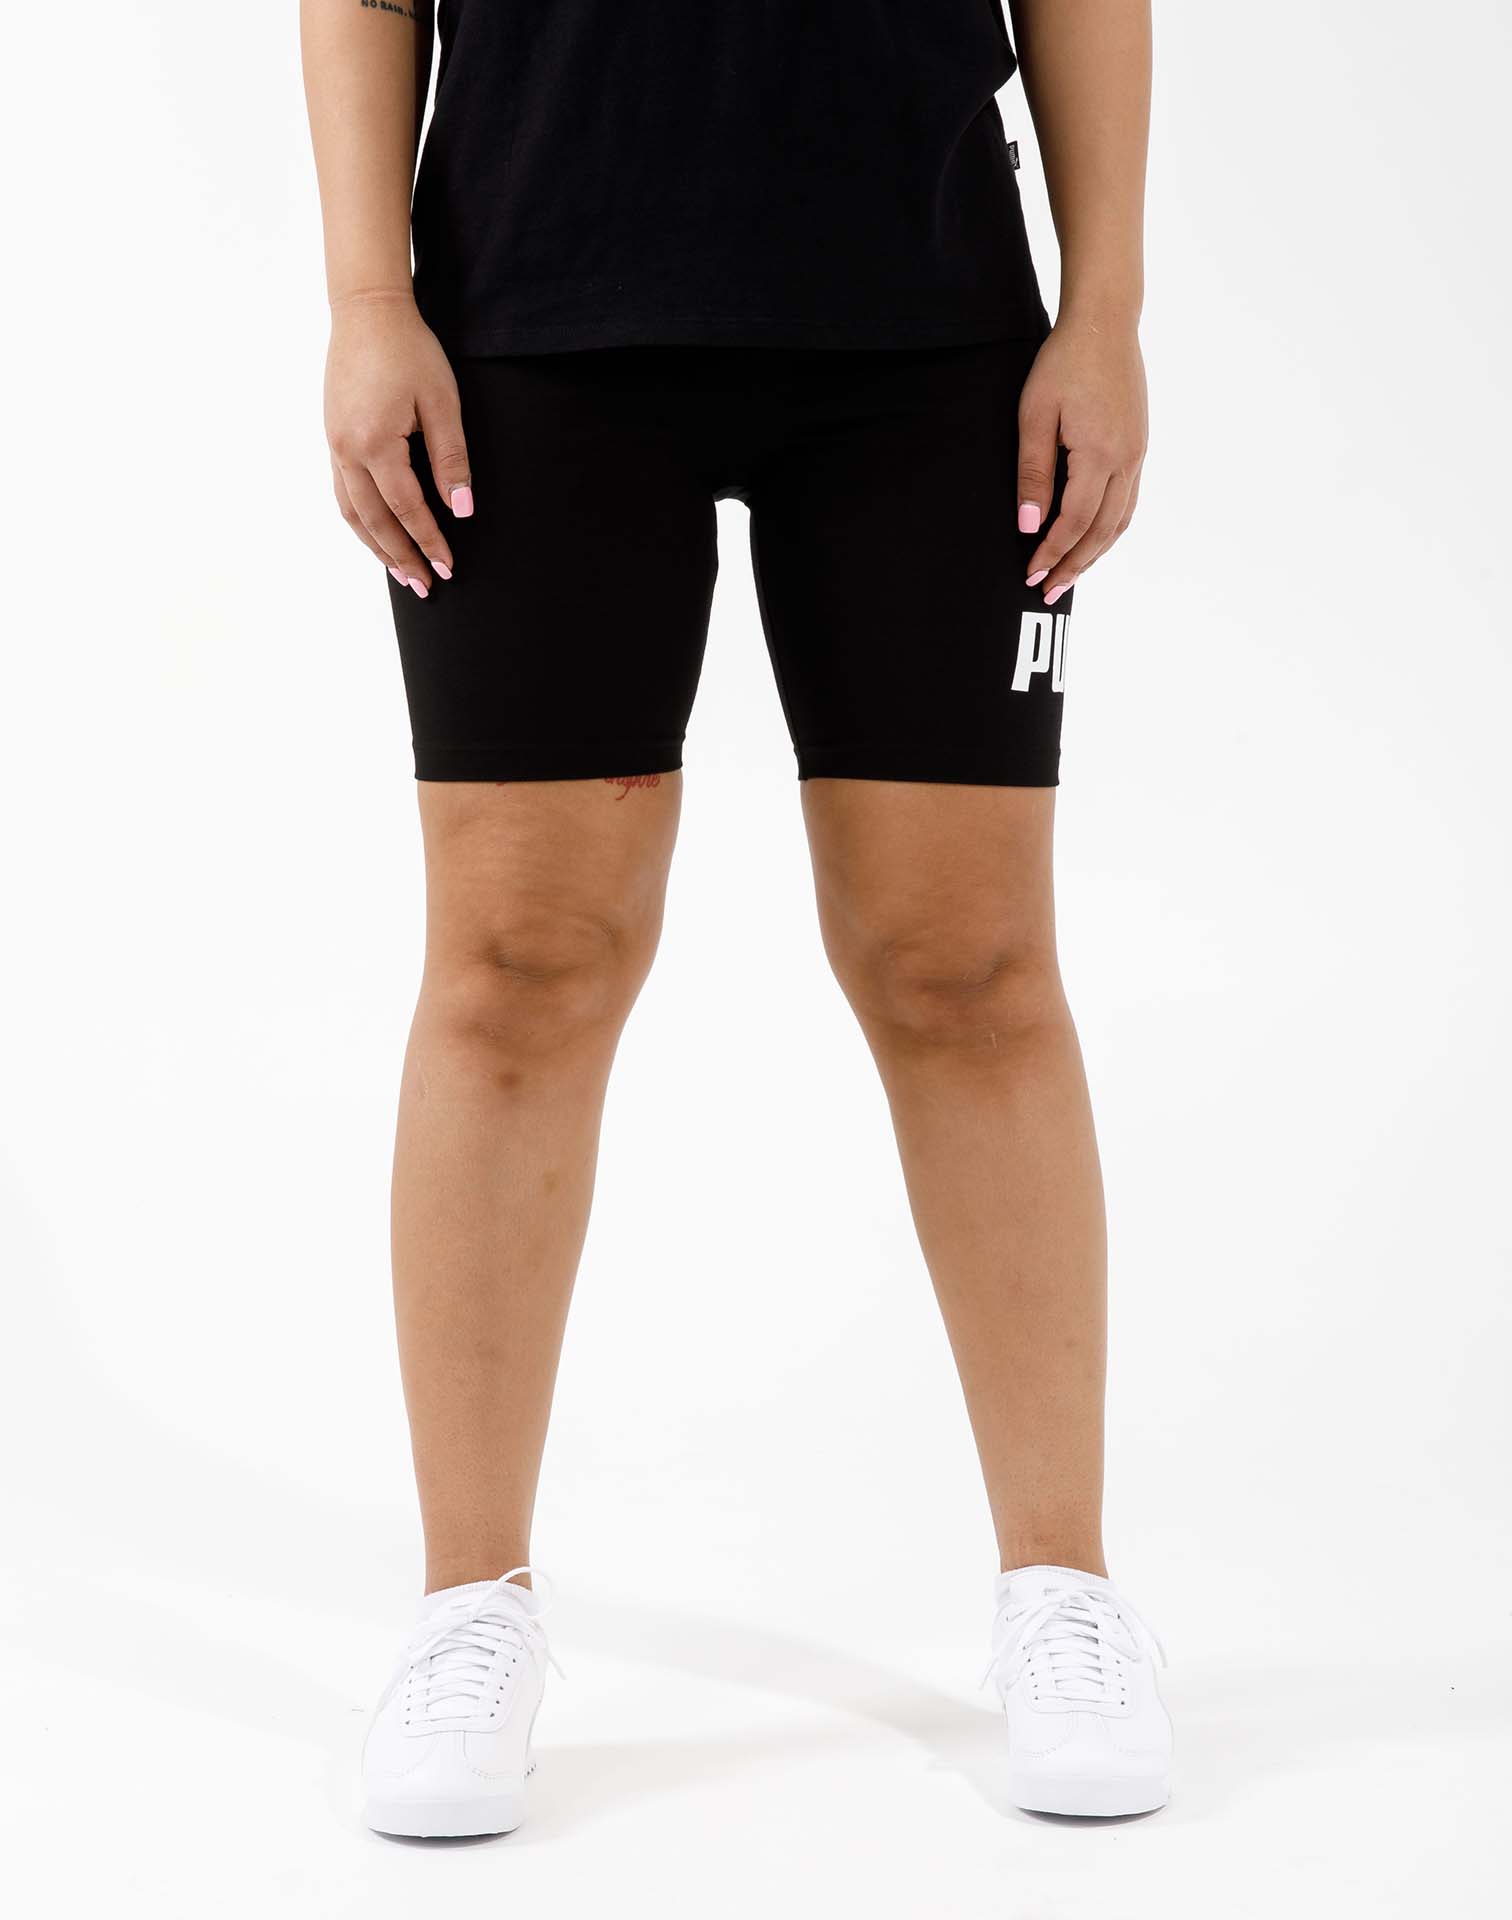 Puma ESS + 7 Short Tight Short leggings with print: for sale at 20.69€ on